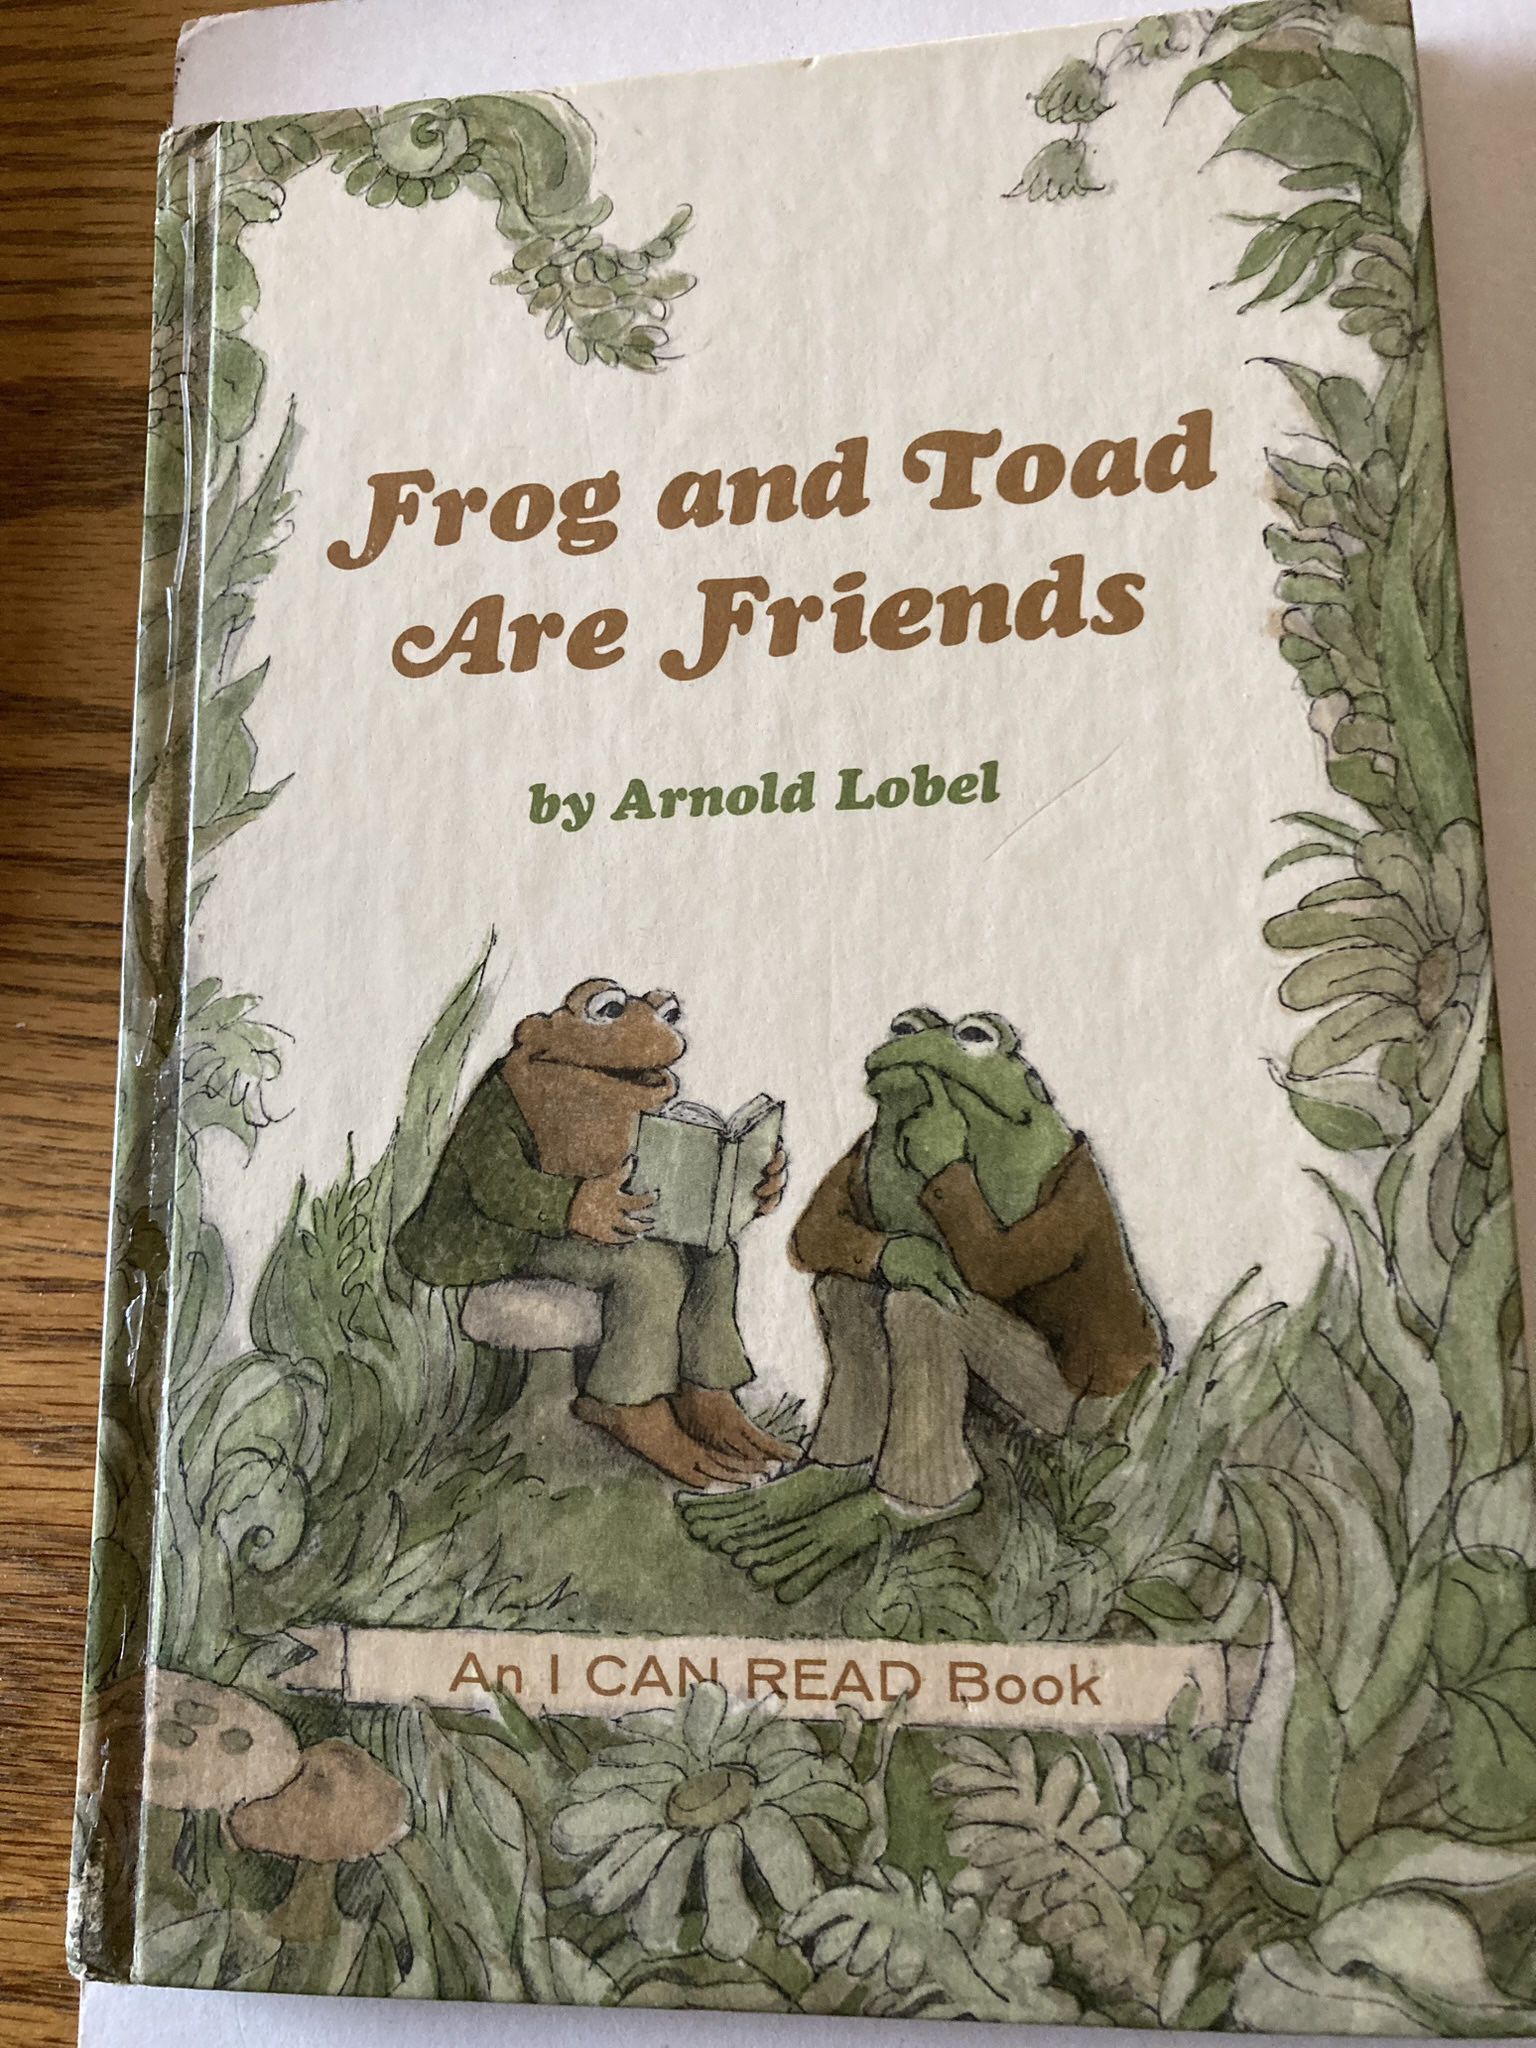 I can read Books By Arnold Lobel